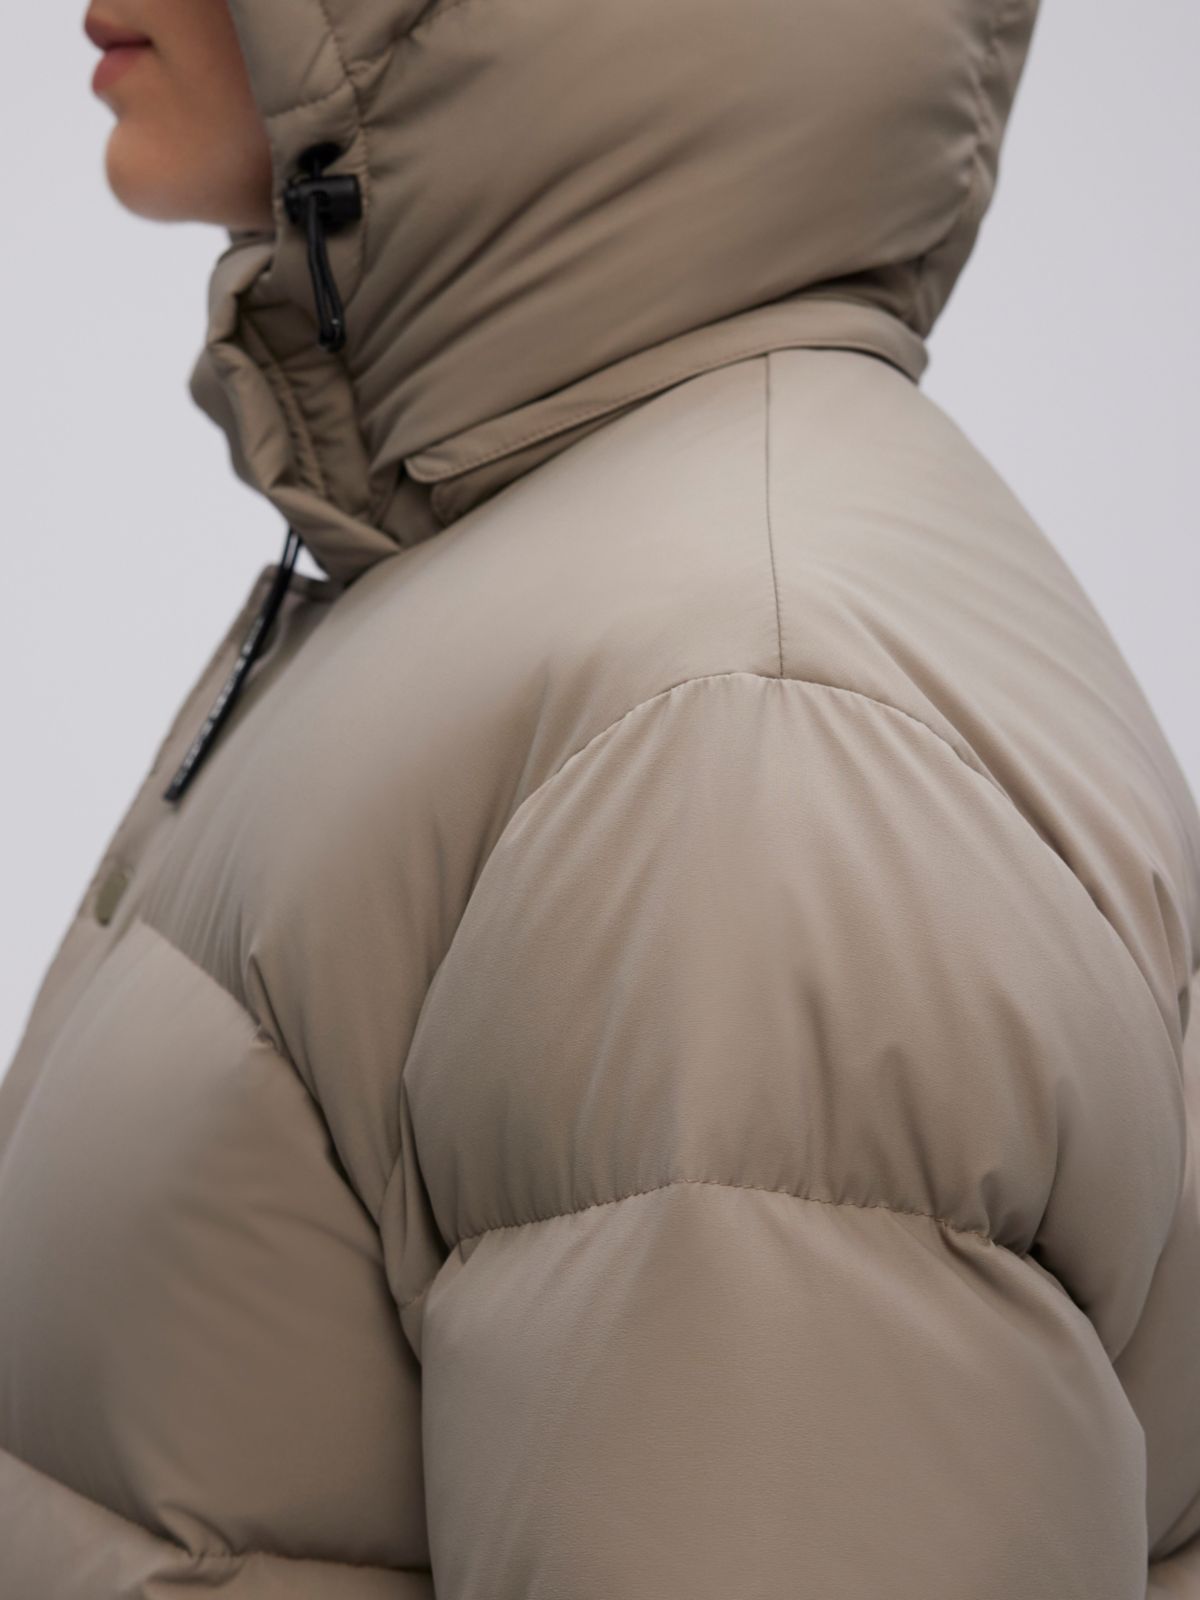 Down Jacket Care Guide